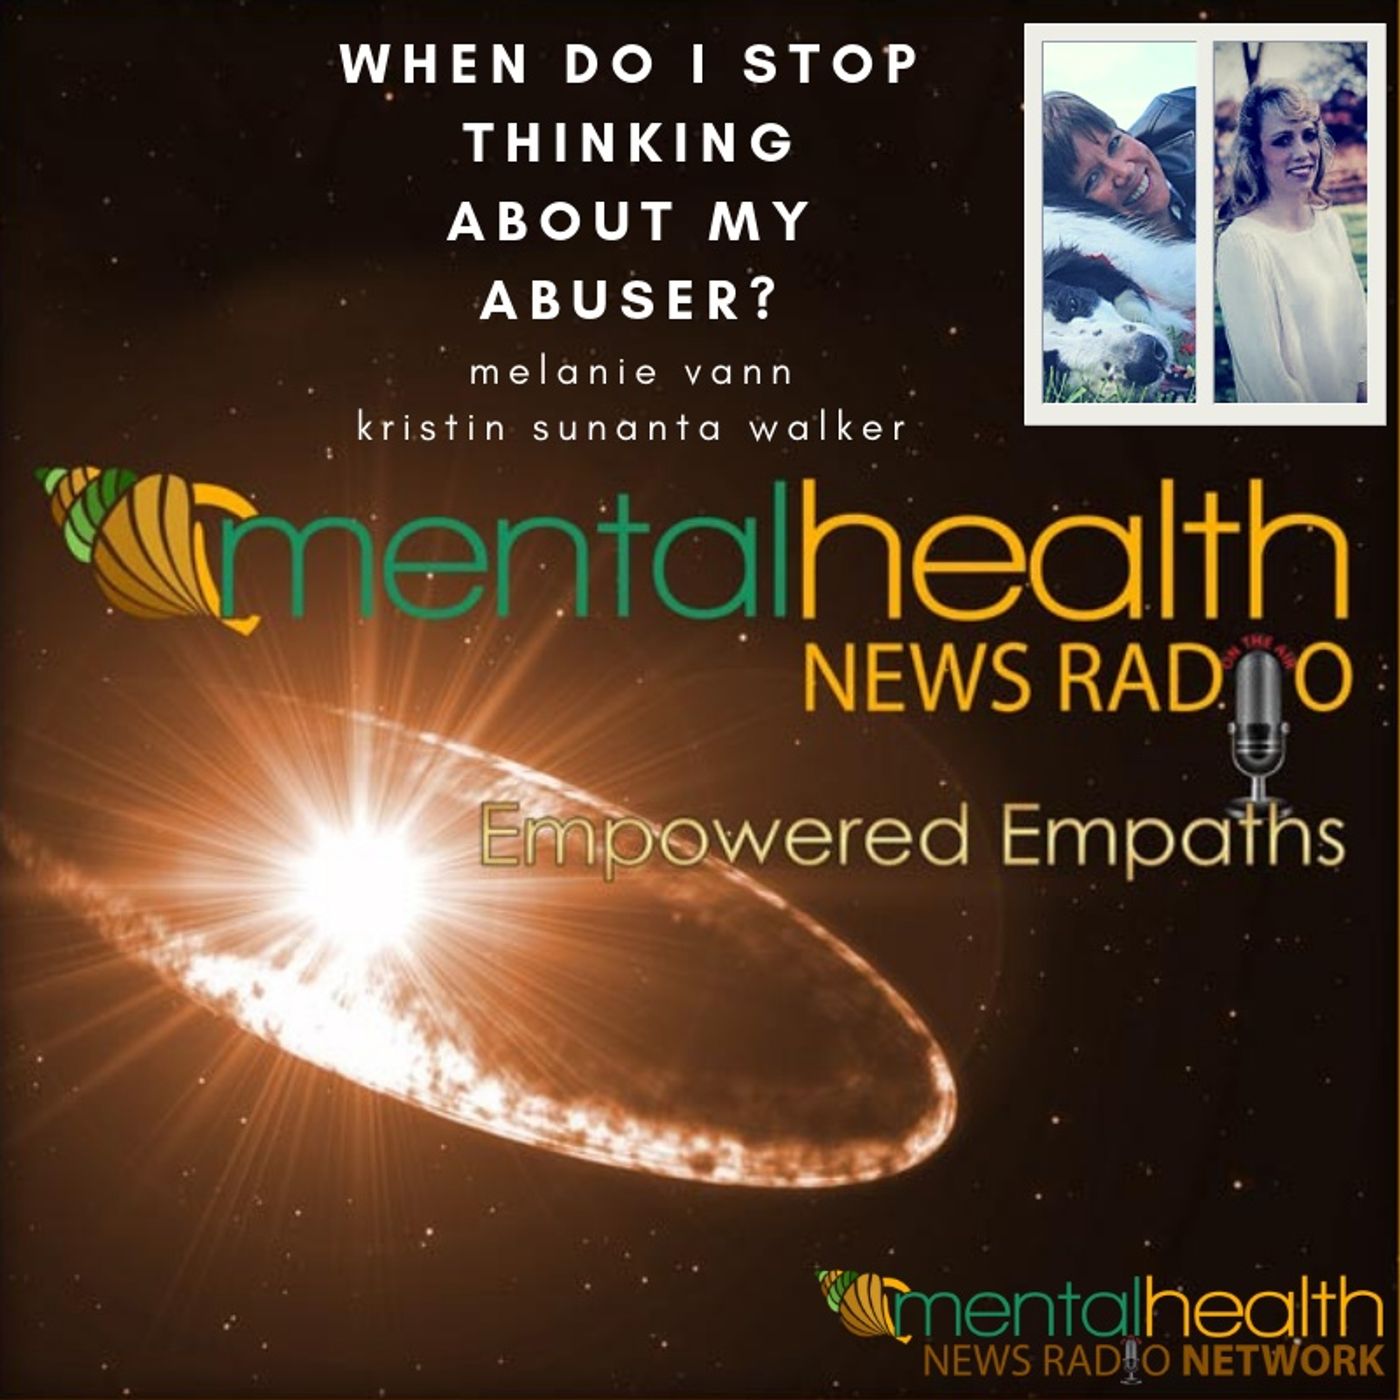 Mental Health News Radio - Empowered Empaths: When Do I Stop Thinking About My Abuser?